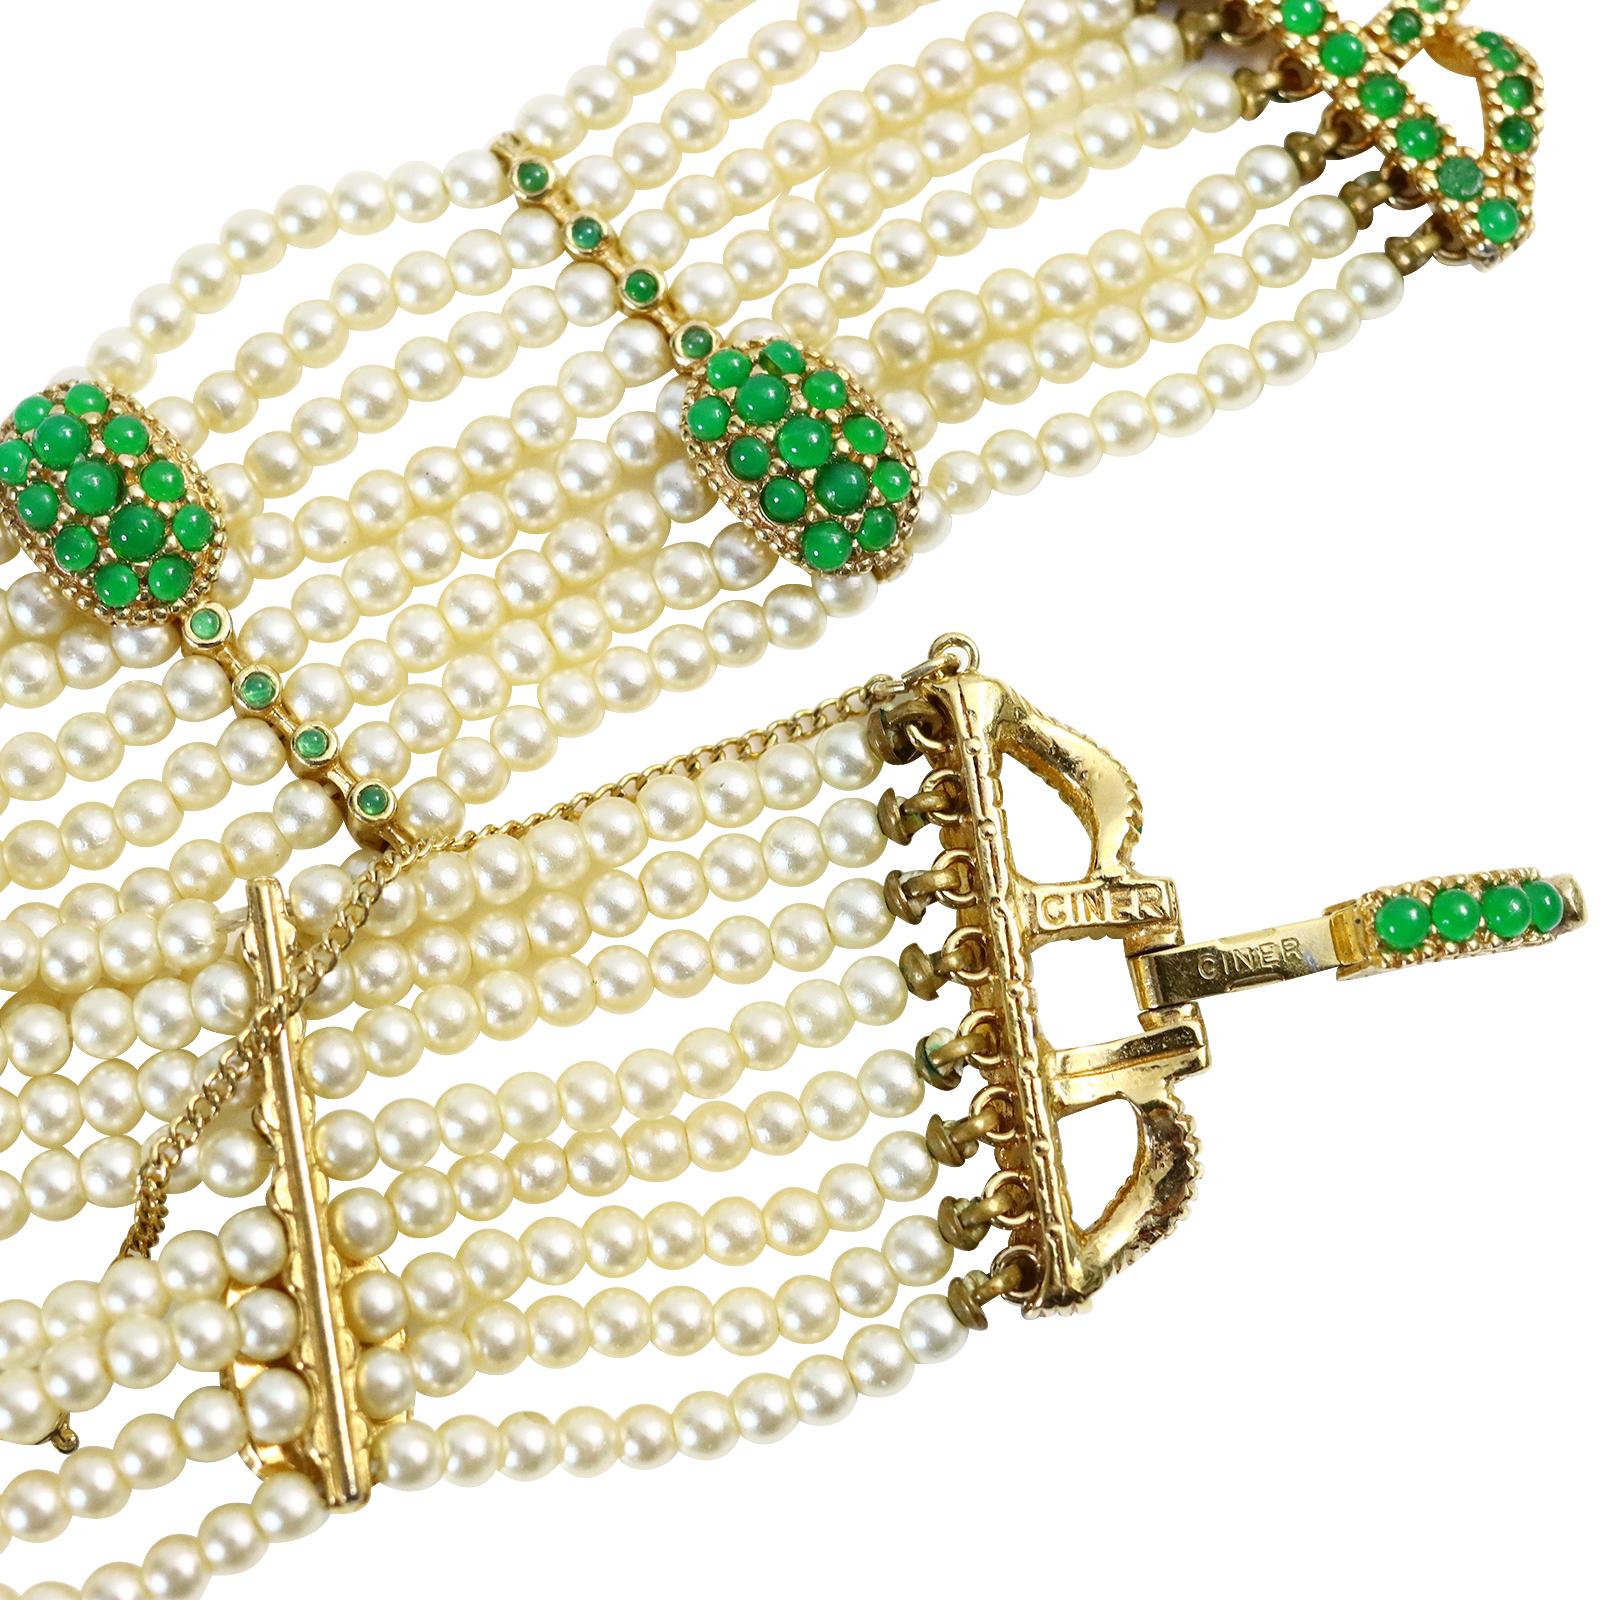 Vintage Faux Pearl With Gold and Green Bead Accent  Bracelet Circa 1980s In Good Condition For Sale In New York, NY